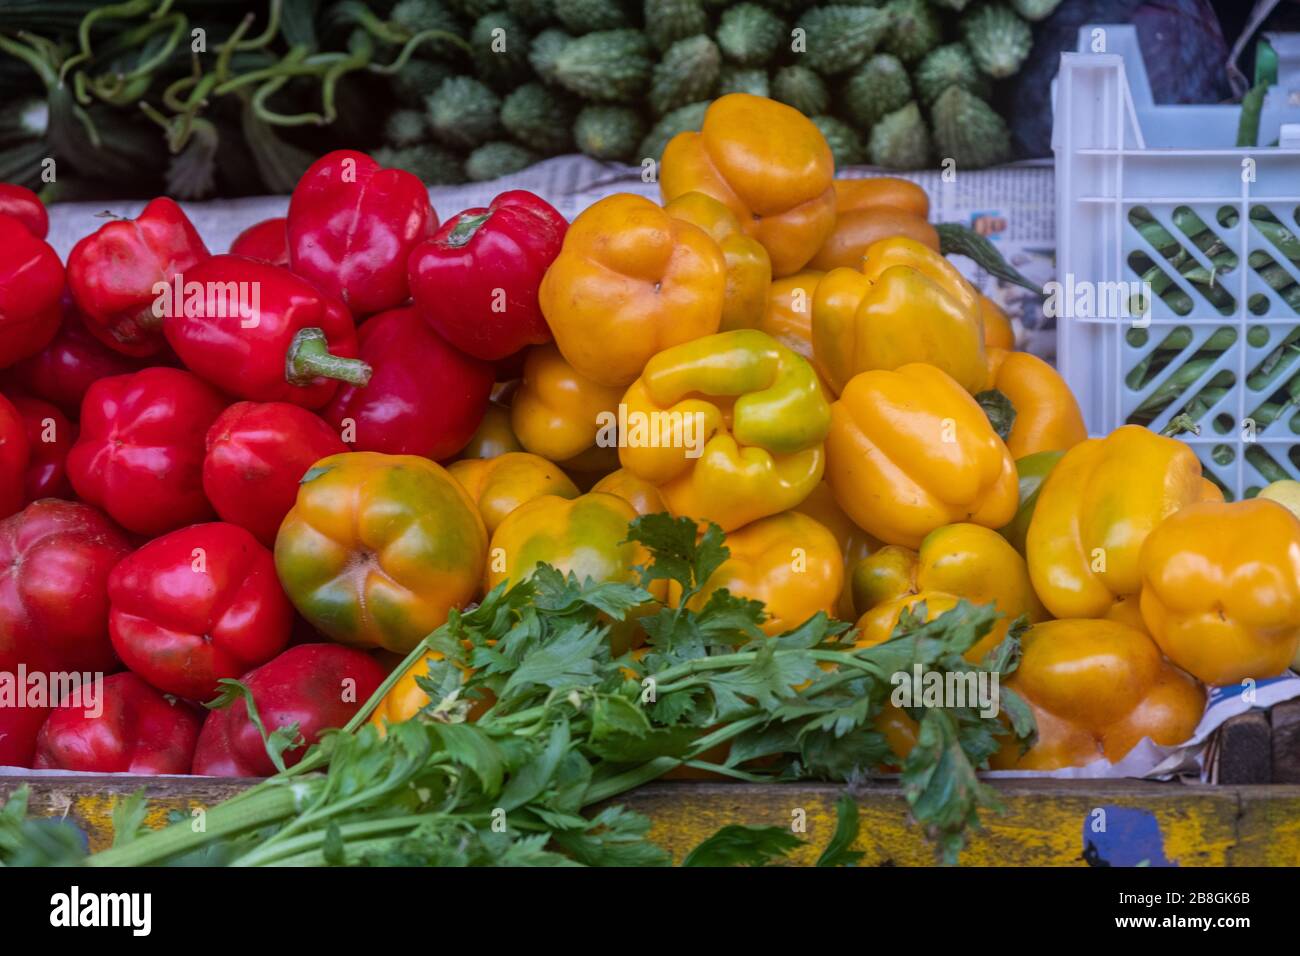 Vegetables For Sale At Market Stall Stock Photo